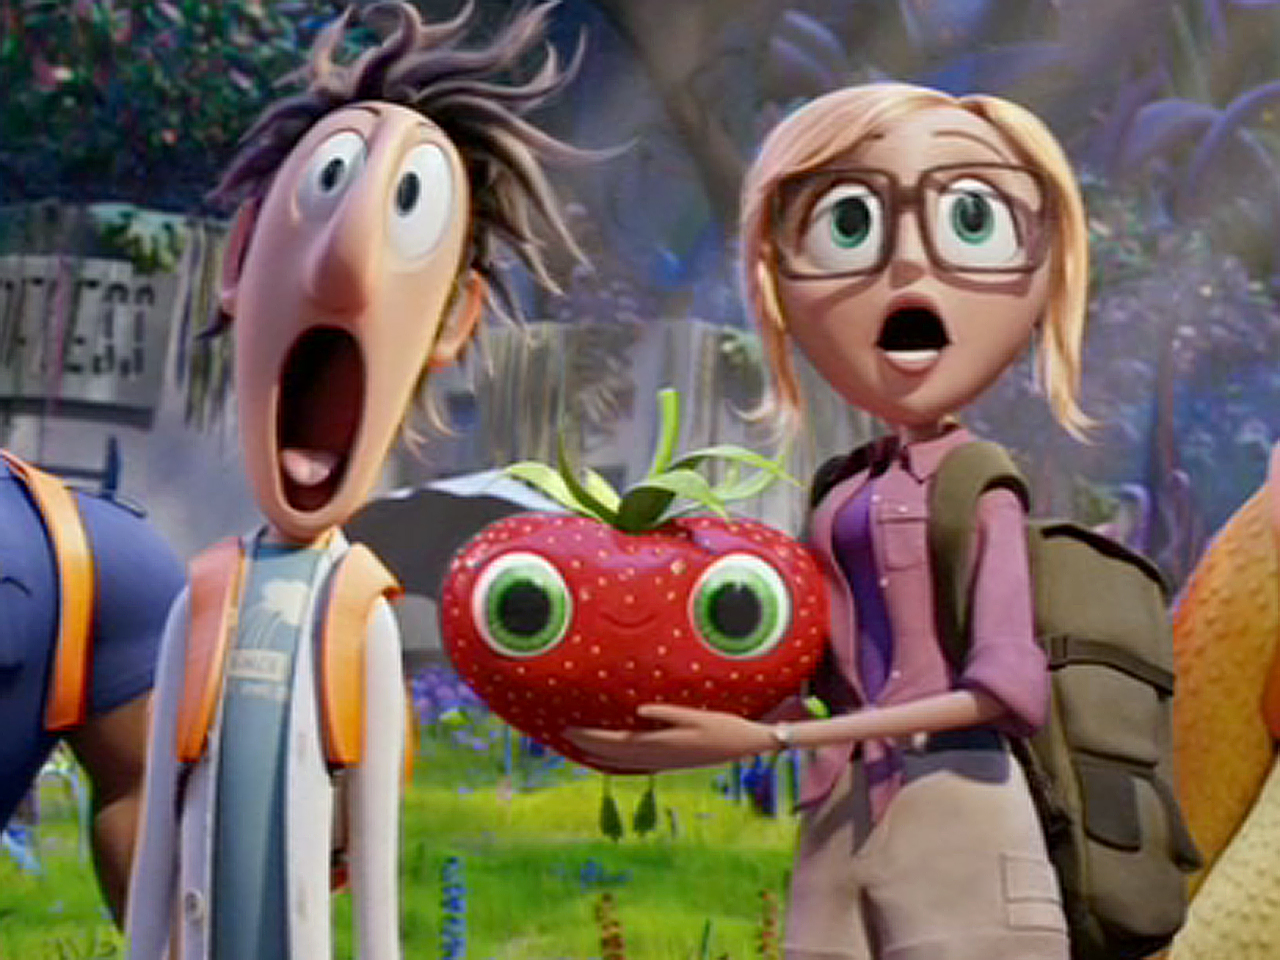 Watch the 'Cloudy with a Chance of Meatballs 2' trailer.